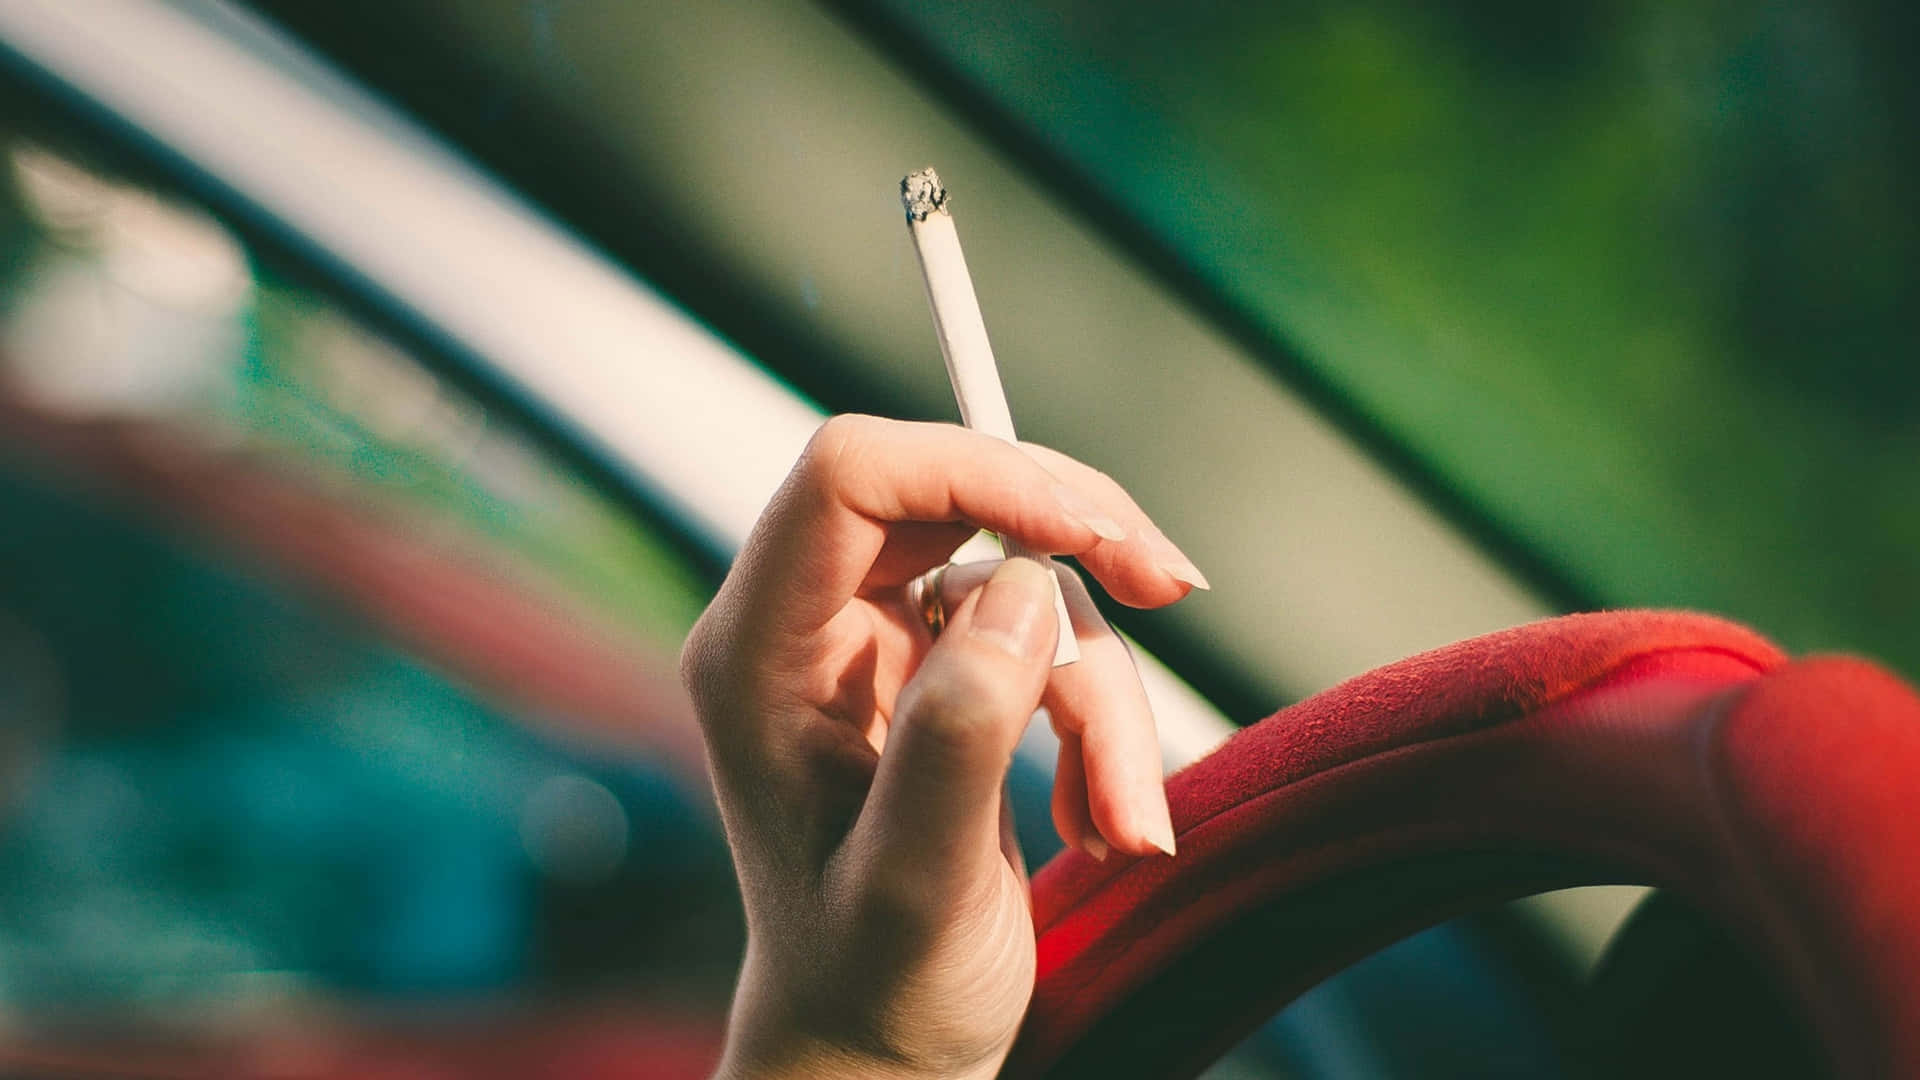 Girl Smoking In A Car Background